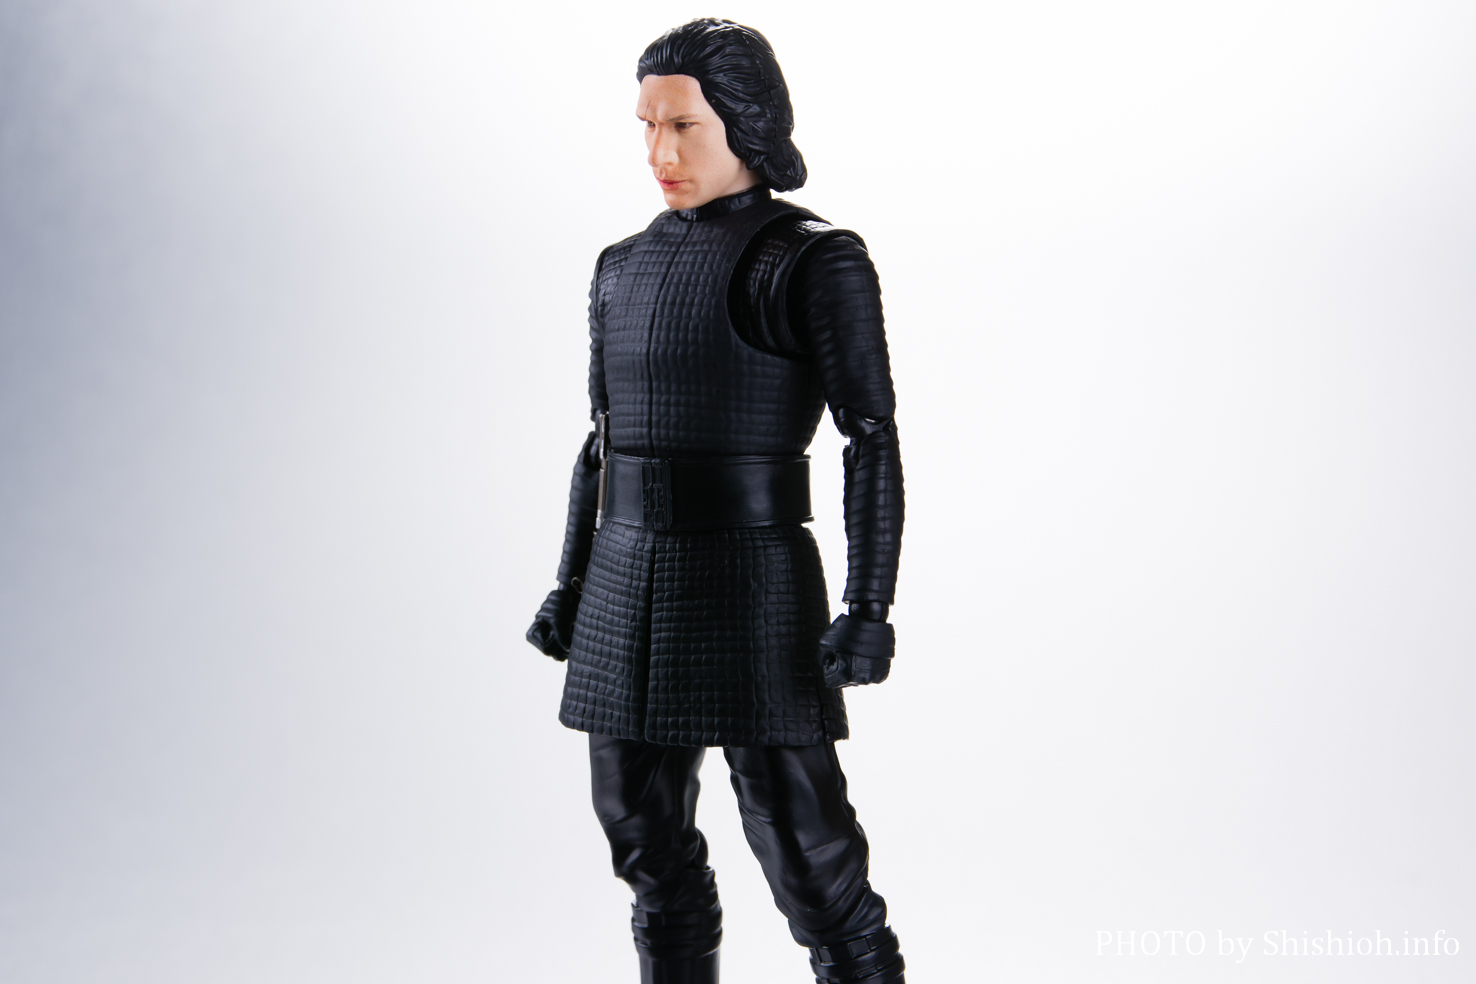 S.H.Figuarts カイロ・レン（STAR WARS: The Rise of Skywalker）